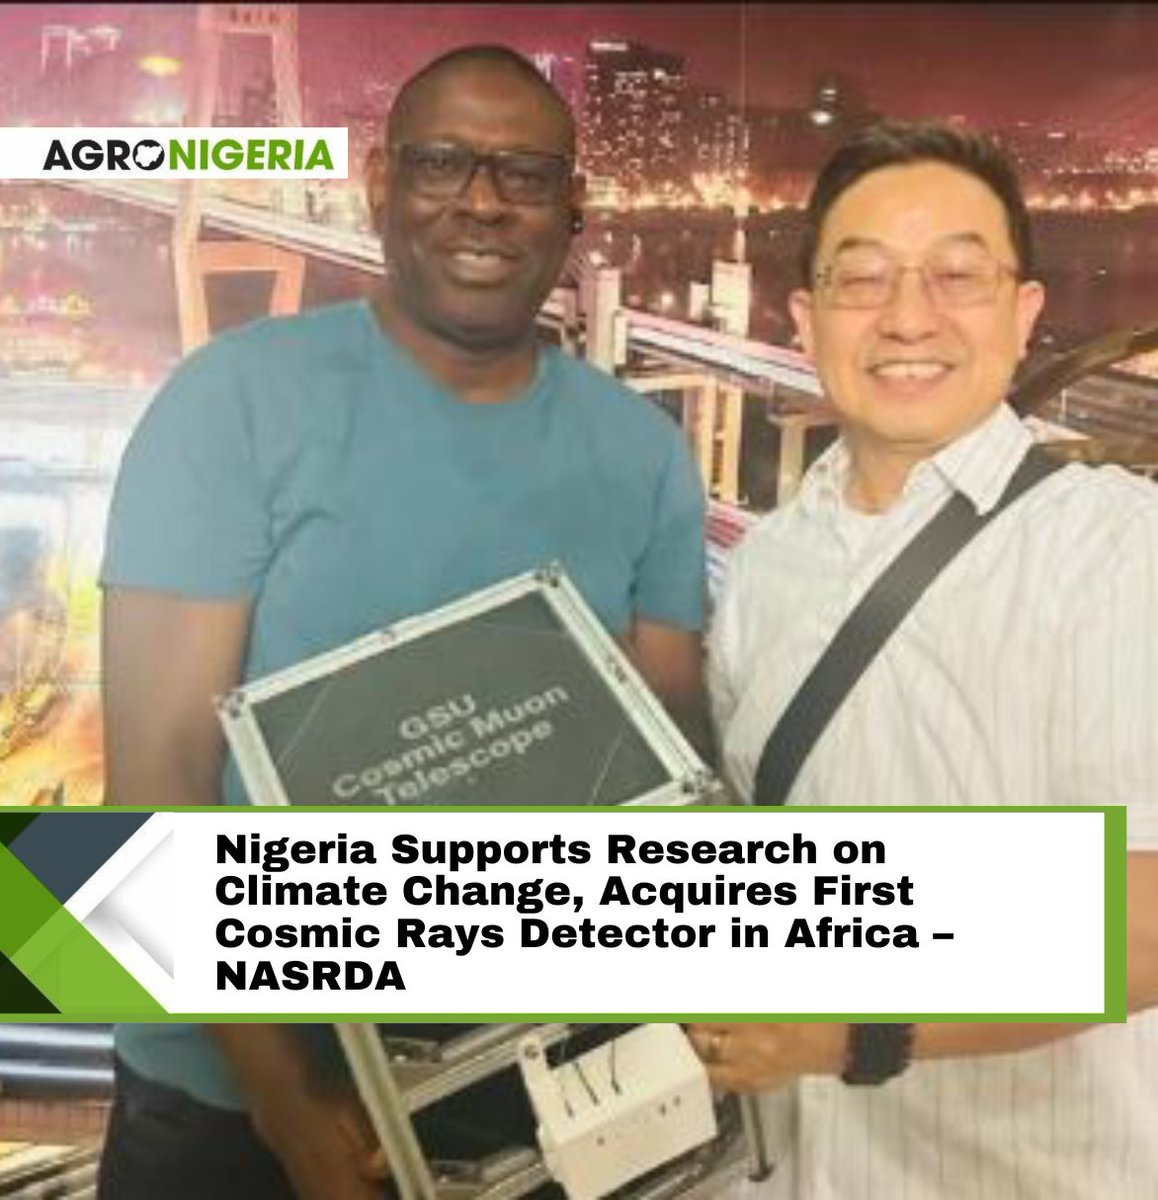 The National Space Research and Development Agency (NASRDA) has announced that Nigeria has obtained a cosmic ray muon detector, the first in Africa, to support research on climate change and atmospheric conditions. Read more: agronigeria.ng/nigeria-suppor…